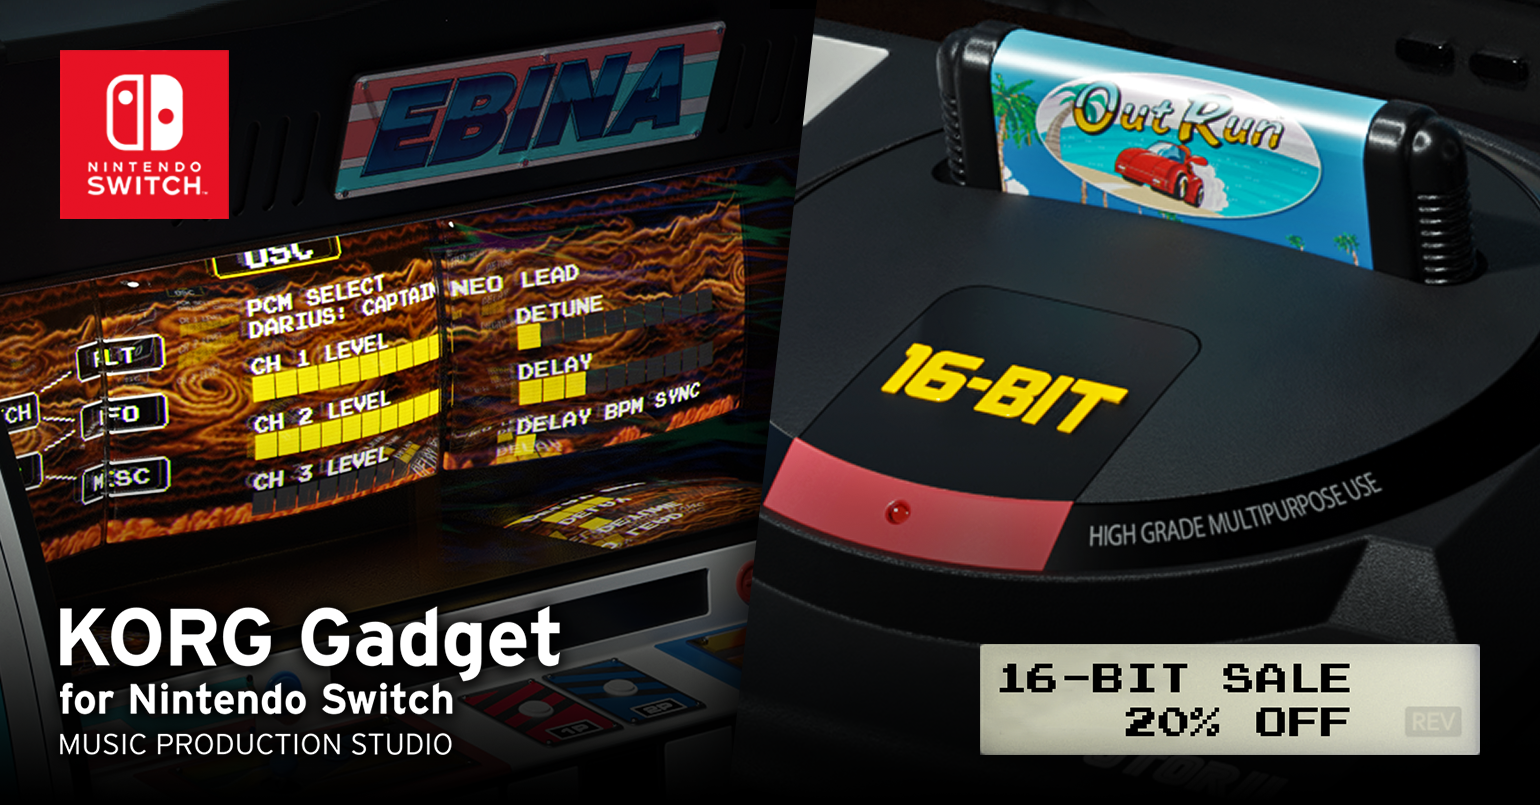 News 16 Bit Sale The Dream Collaboration With Korg Gadget For Nintendo Switch Limited Time Sale For Otorii Ebina Gadgets Korg Philippines